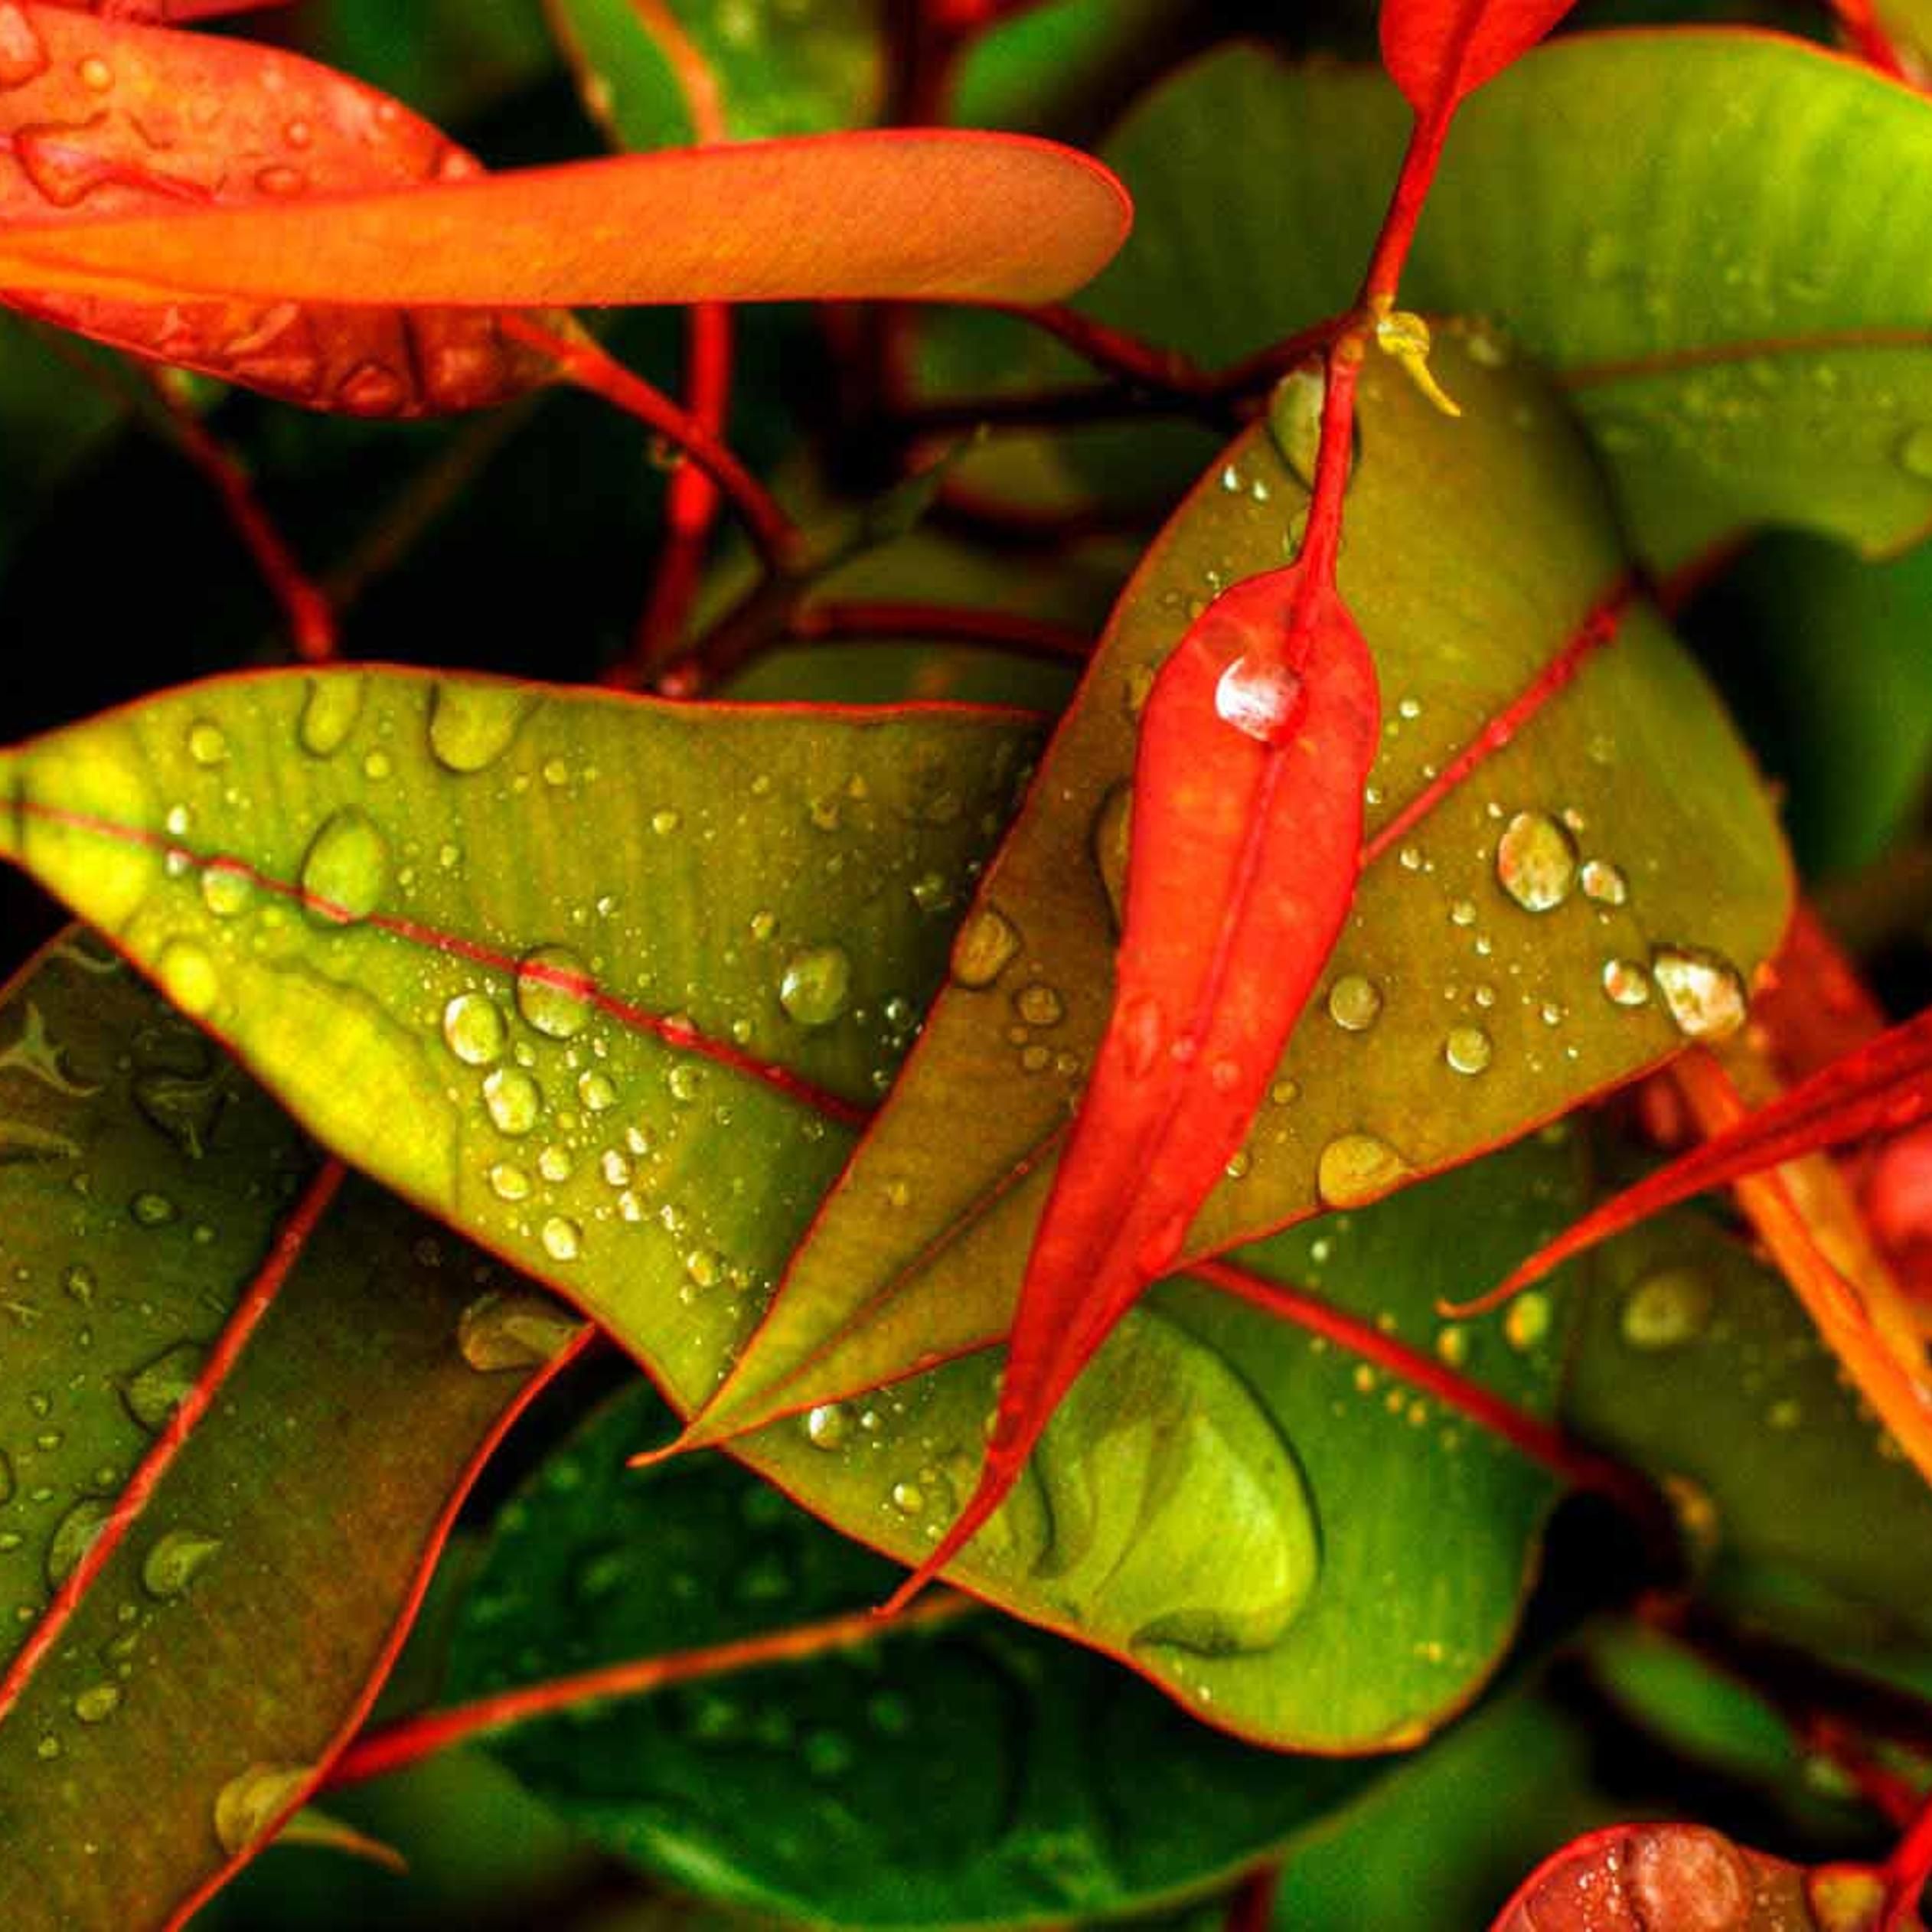 Water drops on the leaves in the morning